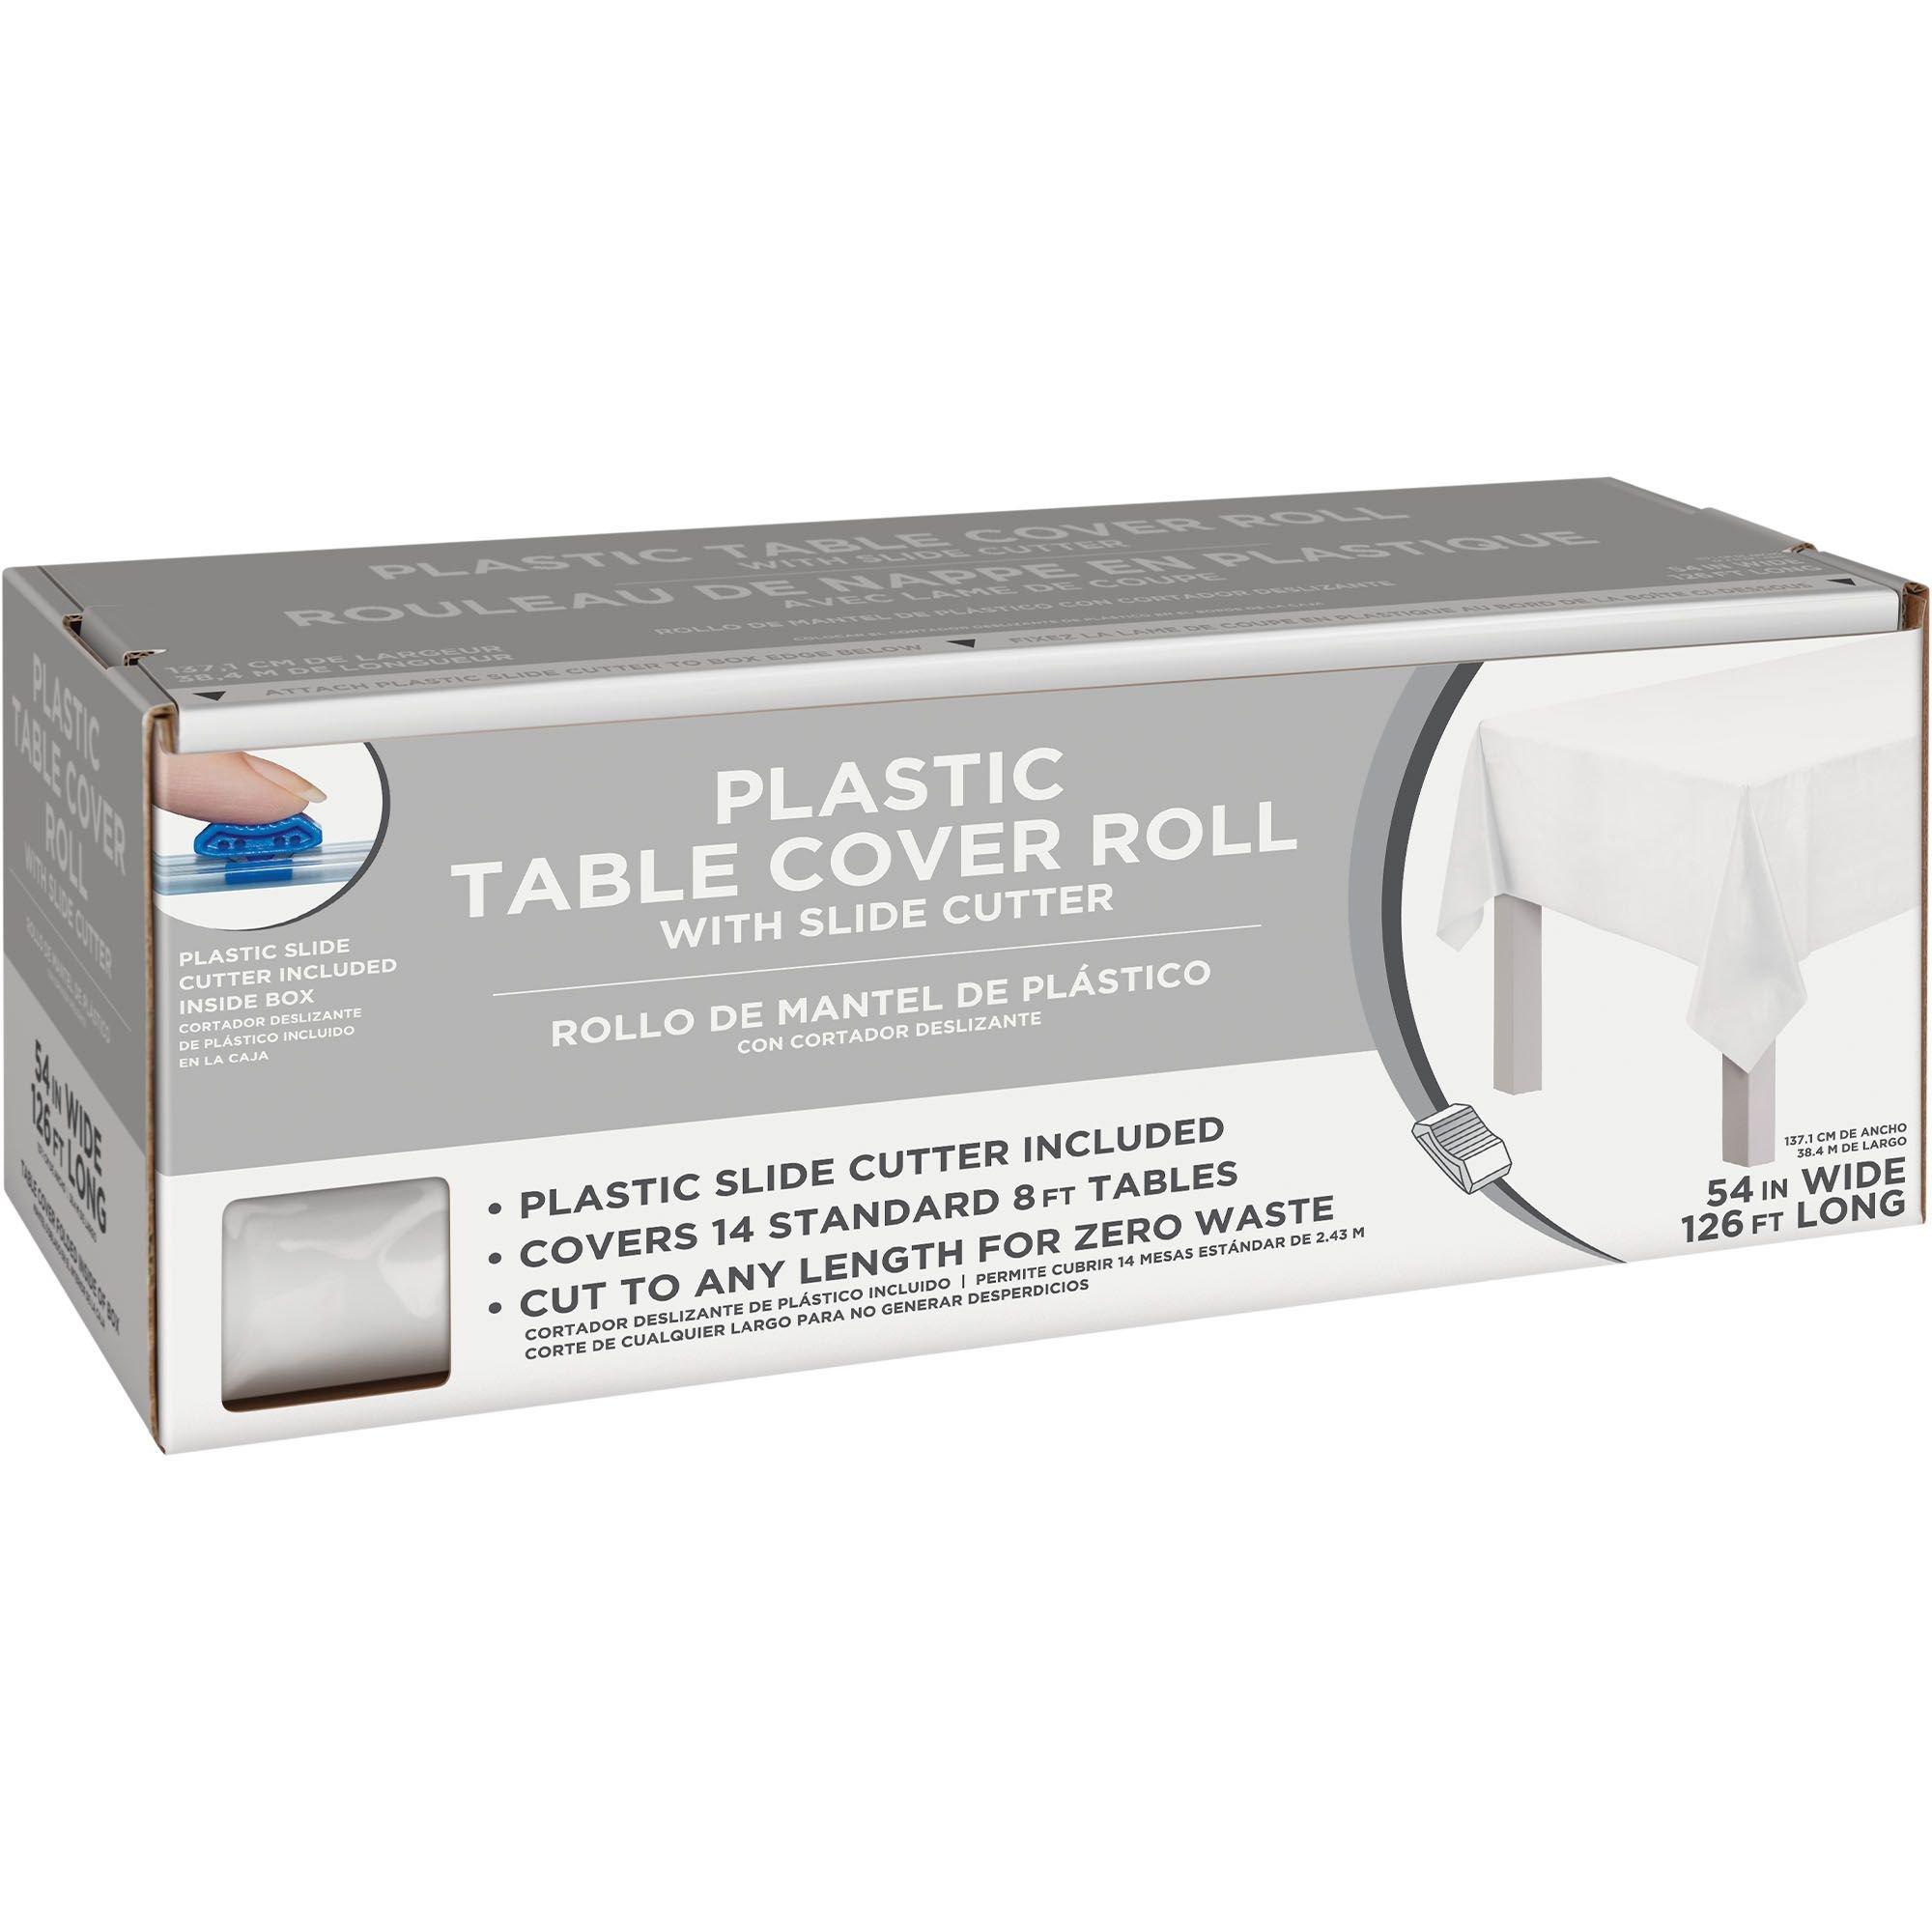 Amscan White Plastic Table Cover Roll with Slide Cutter, 54in x 126ft